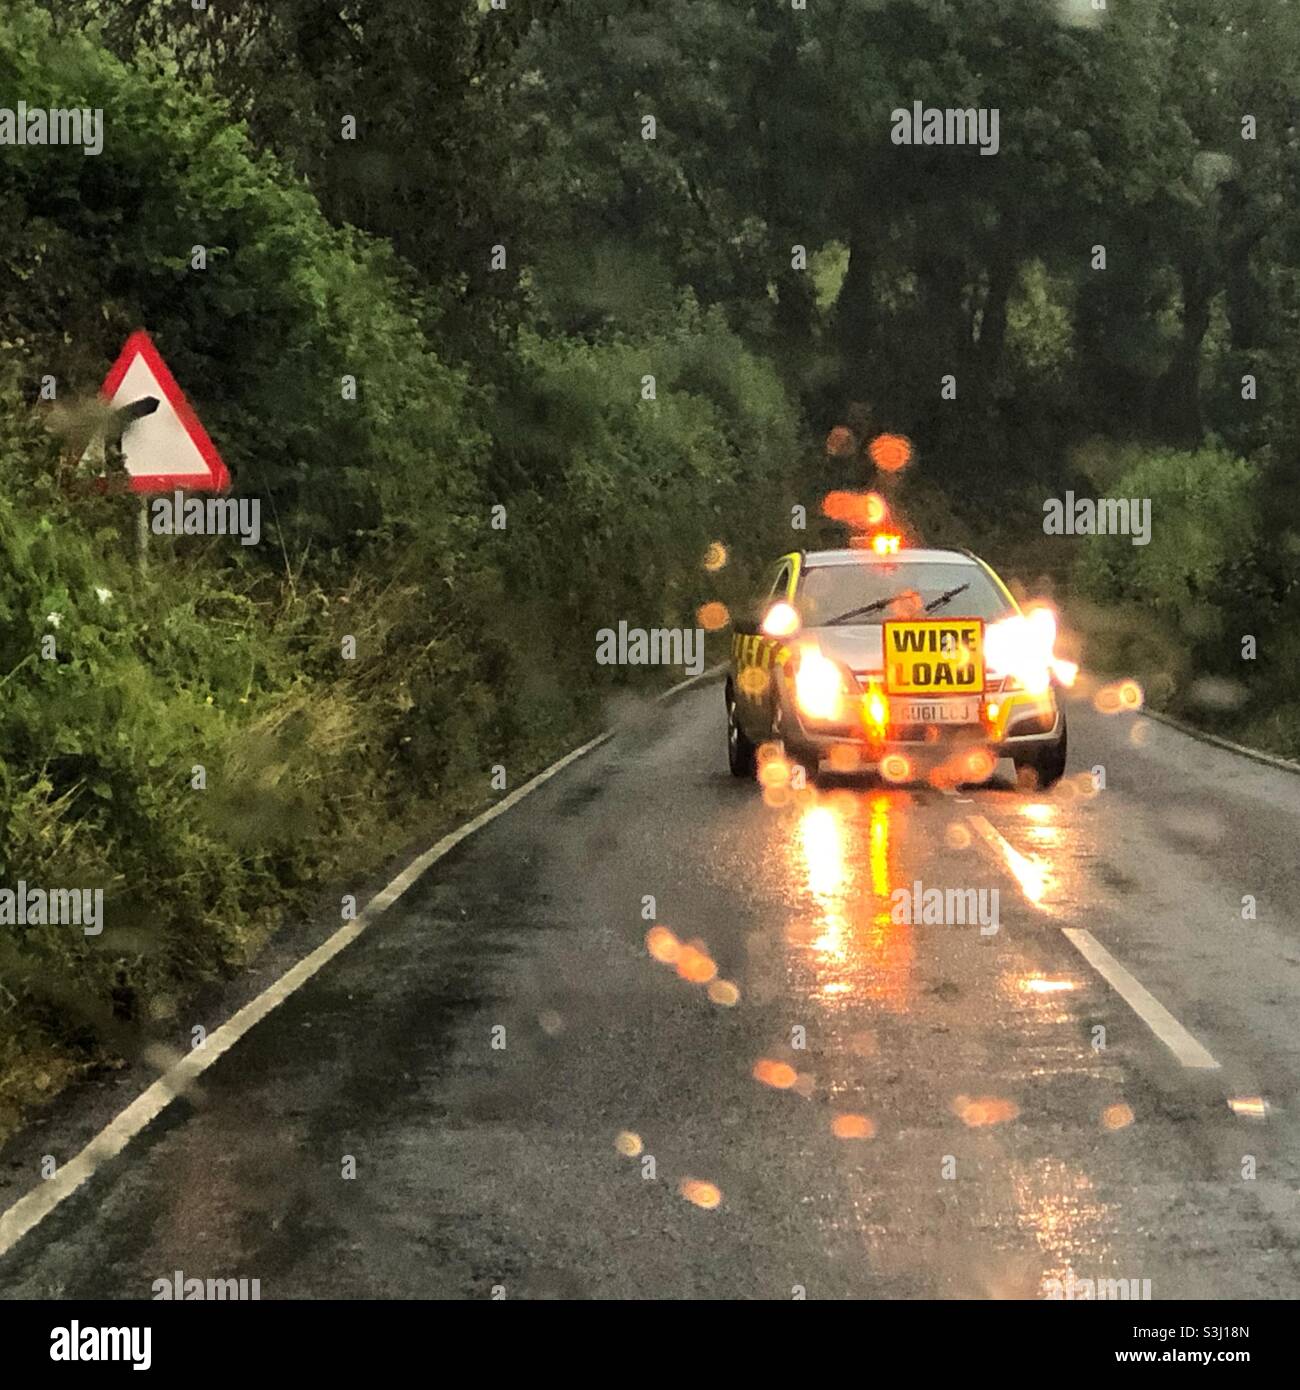 Wide load support vehicle blocks a road to oncoming traffic in wet driving conditions. Stock Photo